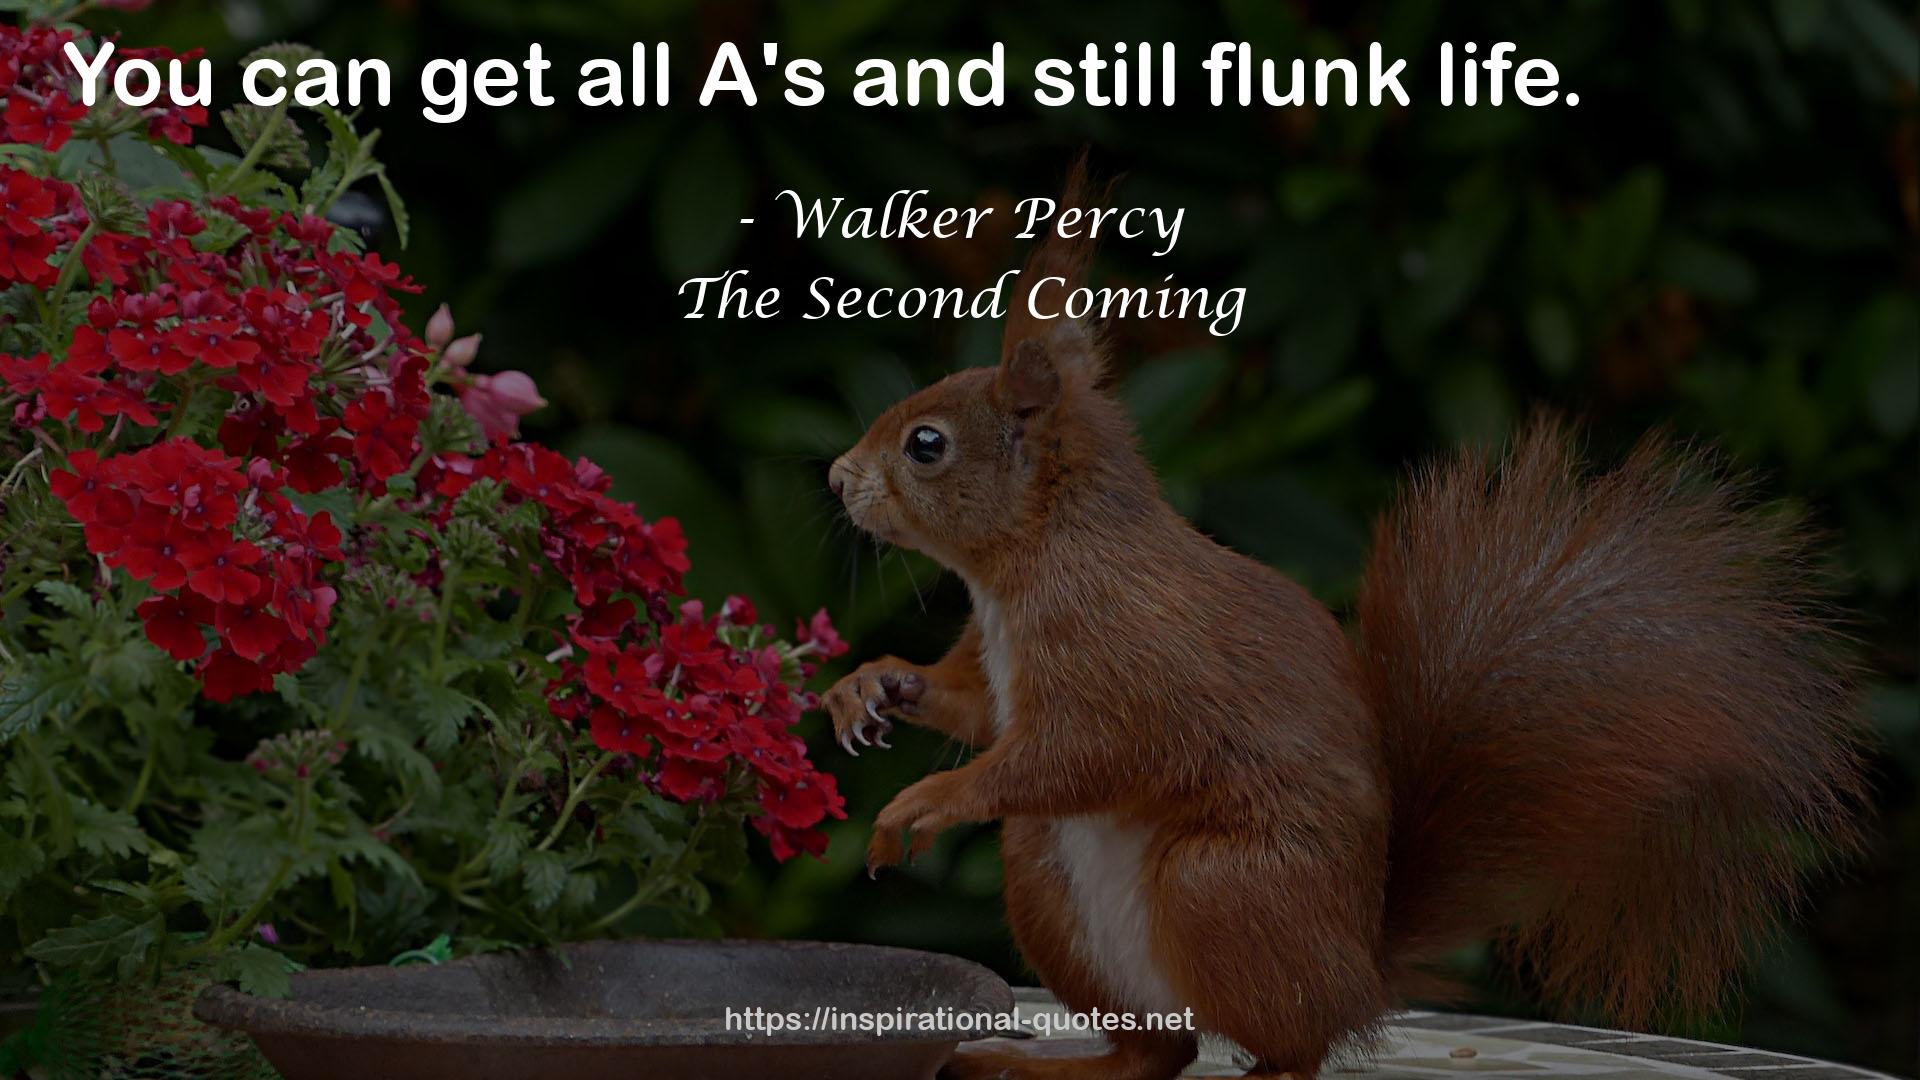 Walker Percy QUOTES